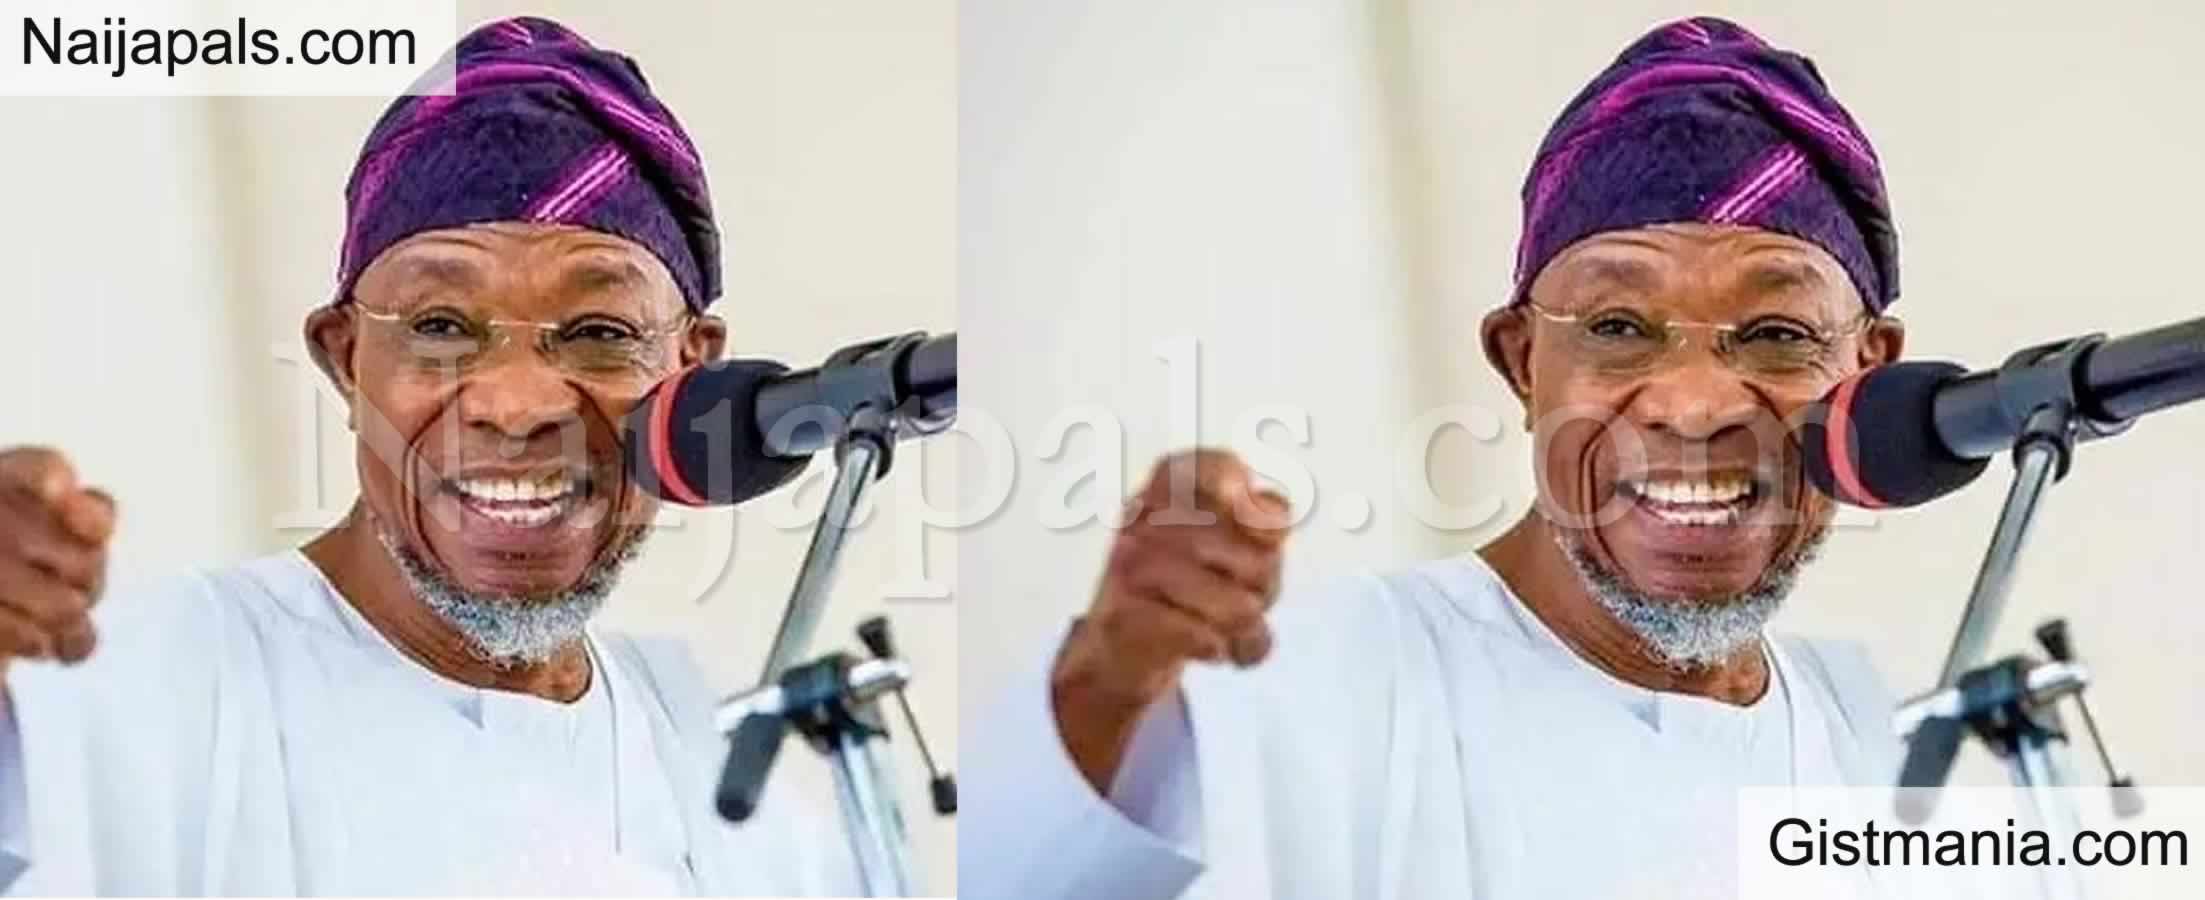 <img alt='.' class='lazyload' data-src='https://img.gistmania.com/emot/comment.gif' /><b>Jailbreak: Shoot Dead Any Prison Attackers - Aregbesola Orders Officers</b>